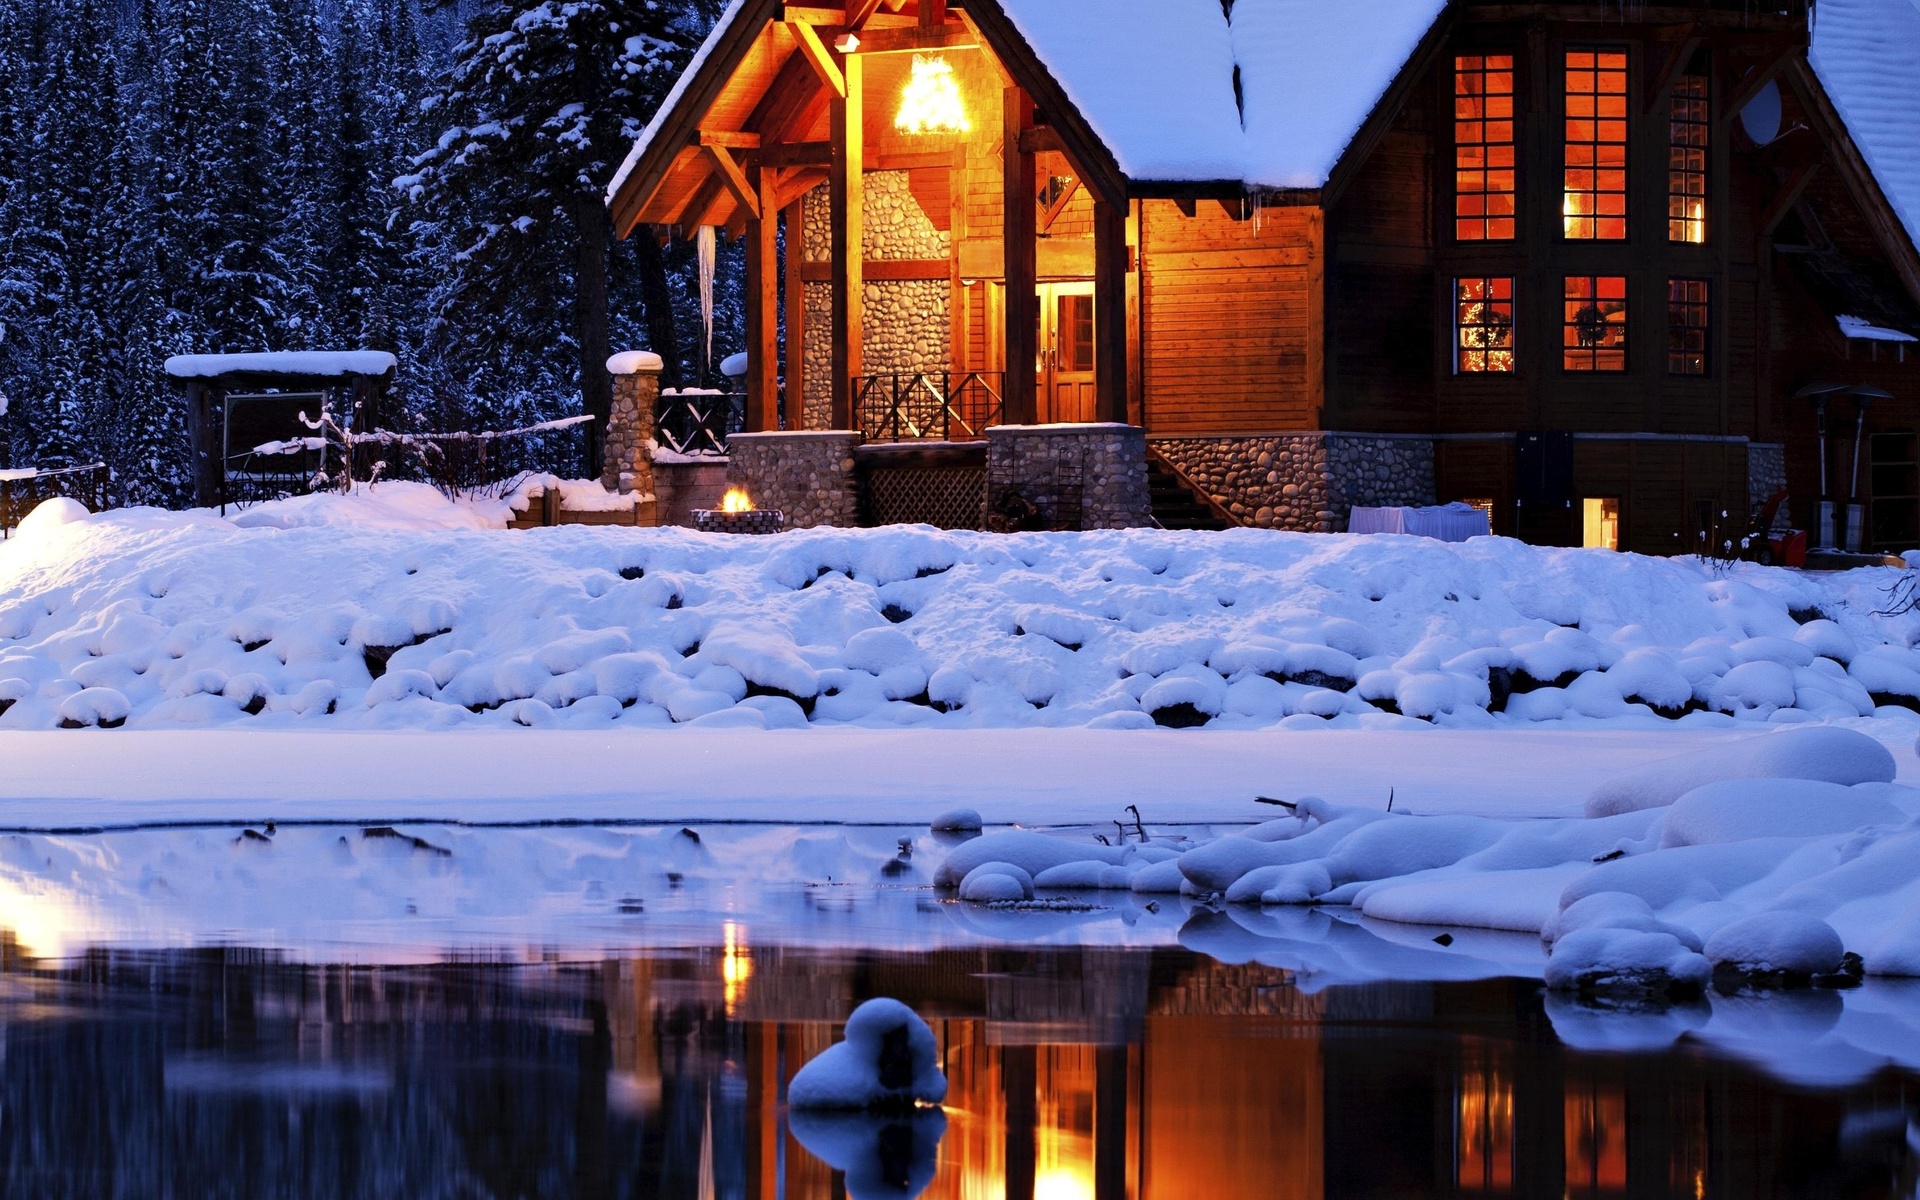 buildings, Cottge, House, Winter, Snow, Lakes, Reflection, Lights, House Wallpaper